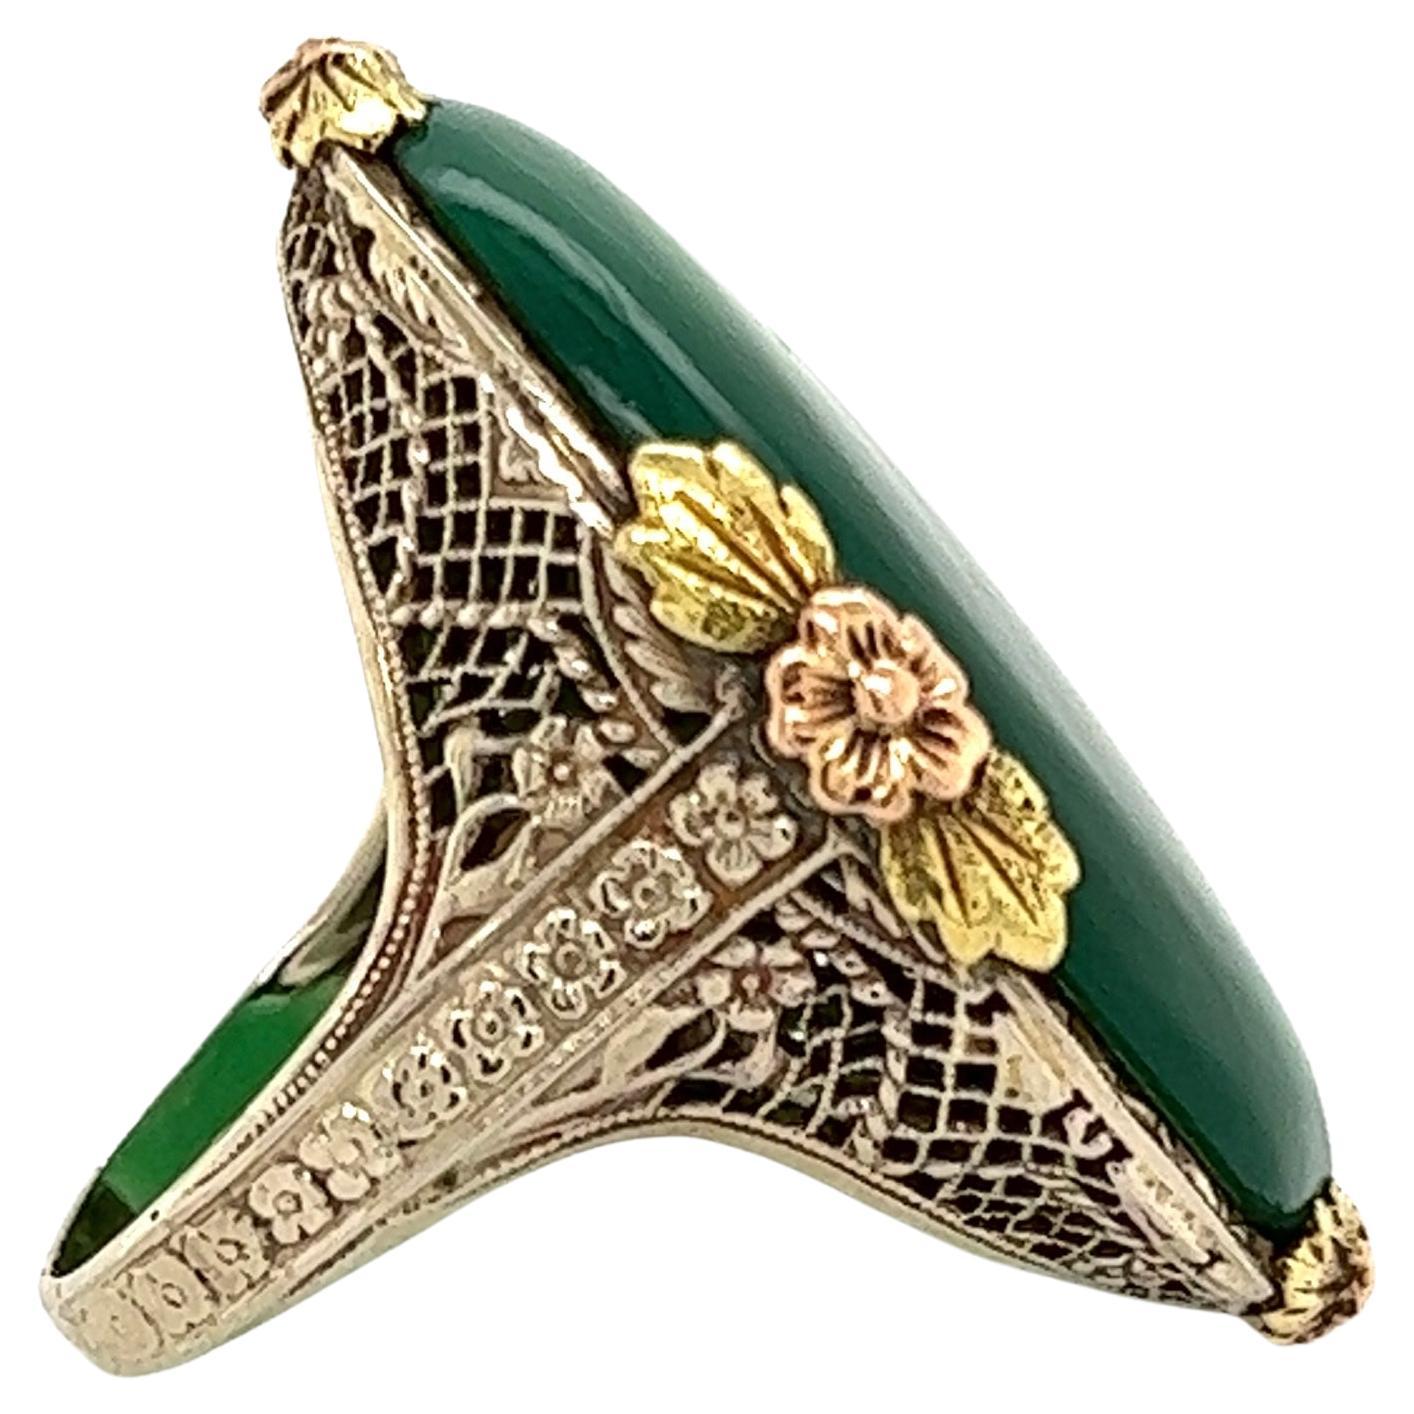 Simply Beautiful! Solitaire Chalcedony Tri Tone Arts & Crafts Cocktail Ring. Centering a Hand set securely nestled Green Chalcedony. Artistically Hand crafted Rose, White and Yellow 14K Gold mounting. Approx. Dimensions of the ring: 0.99